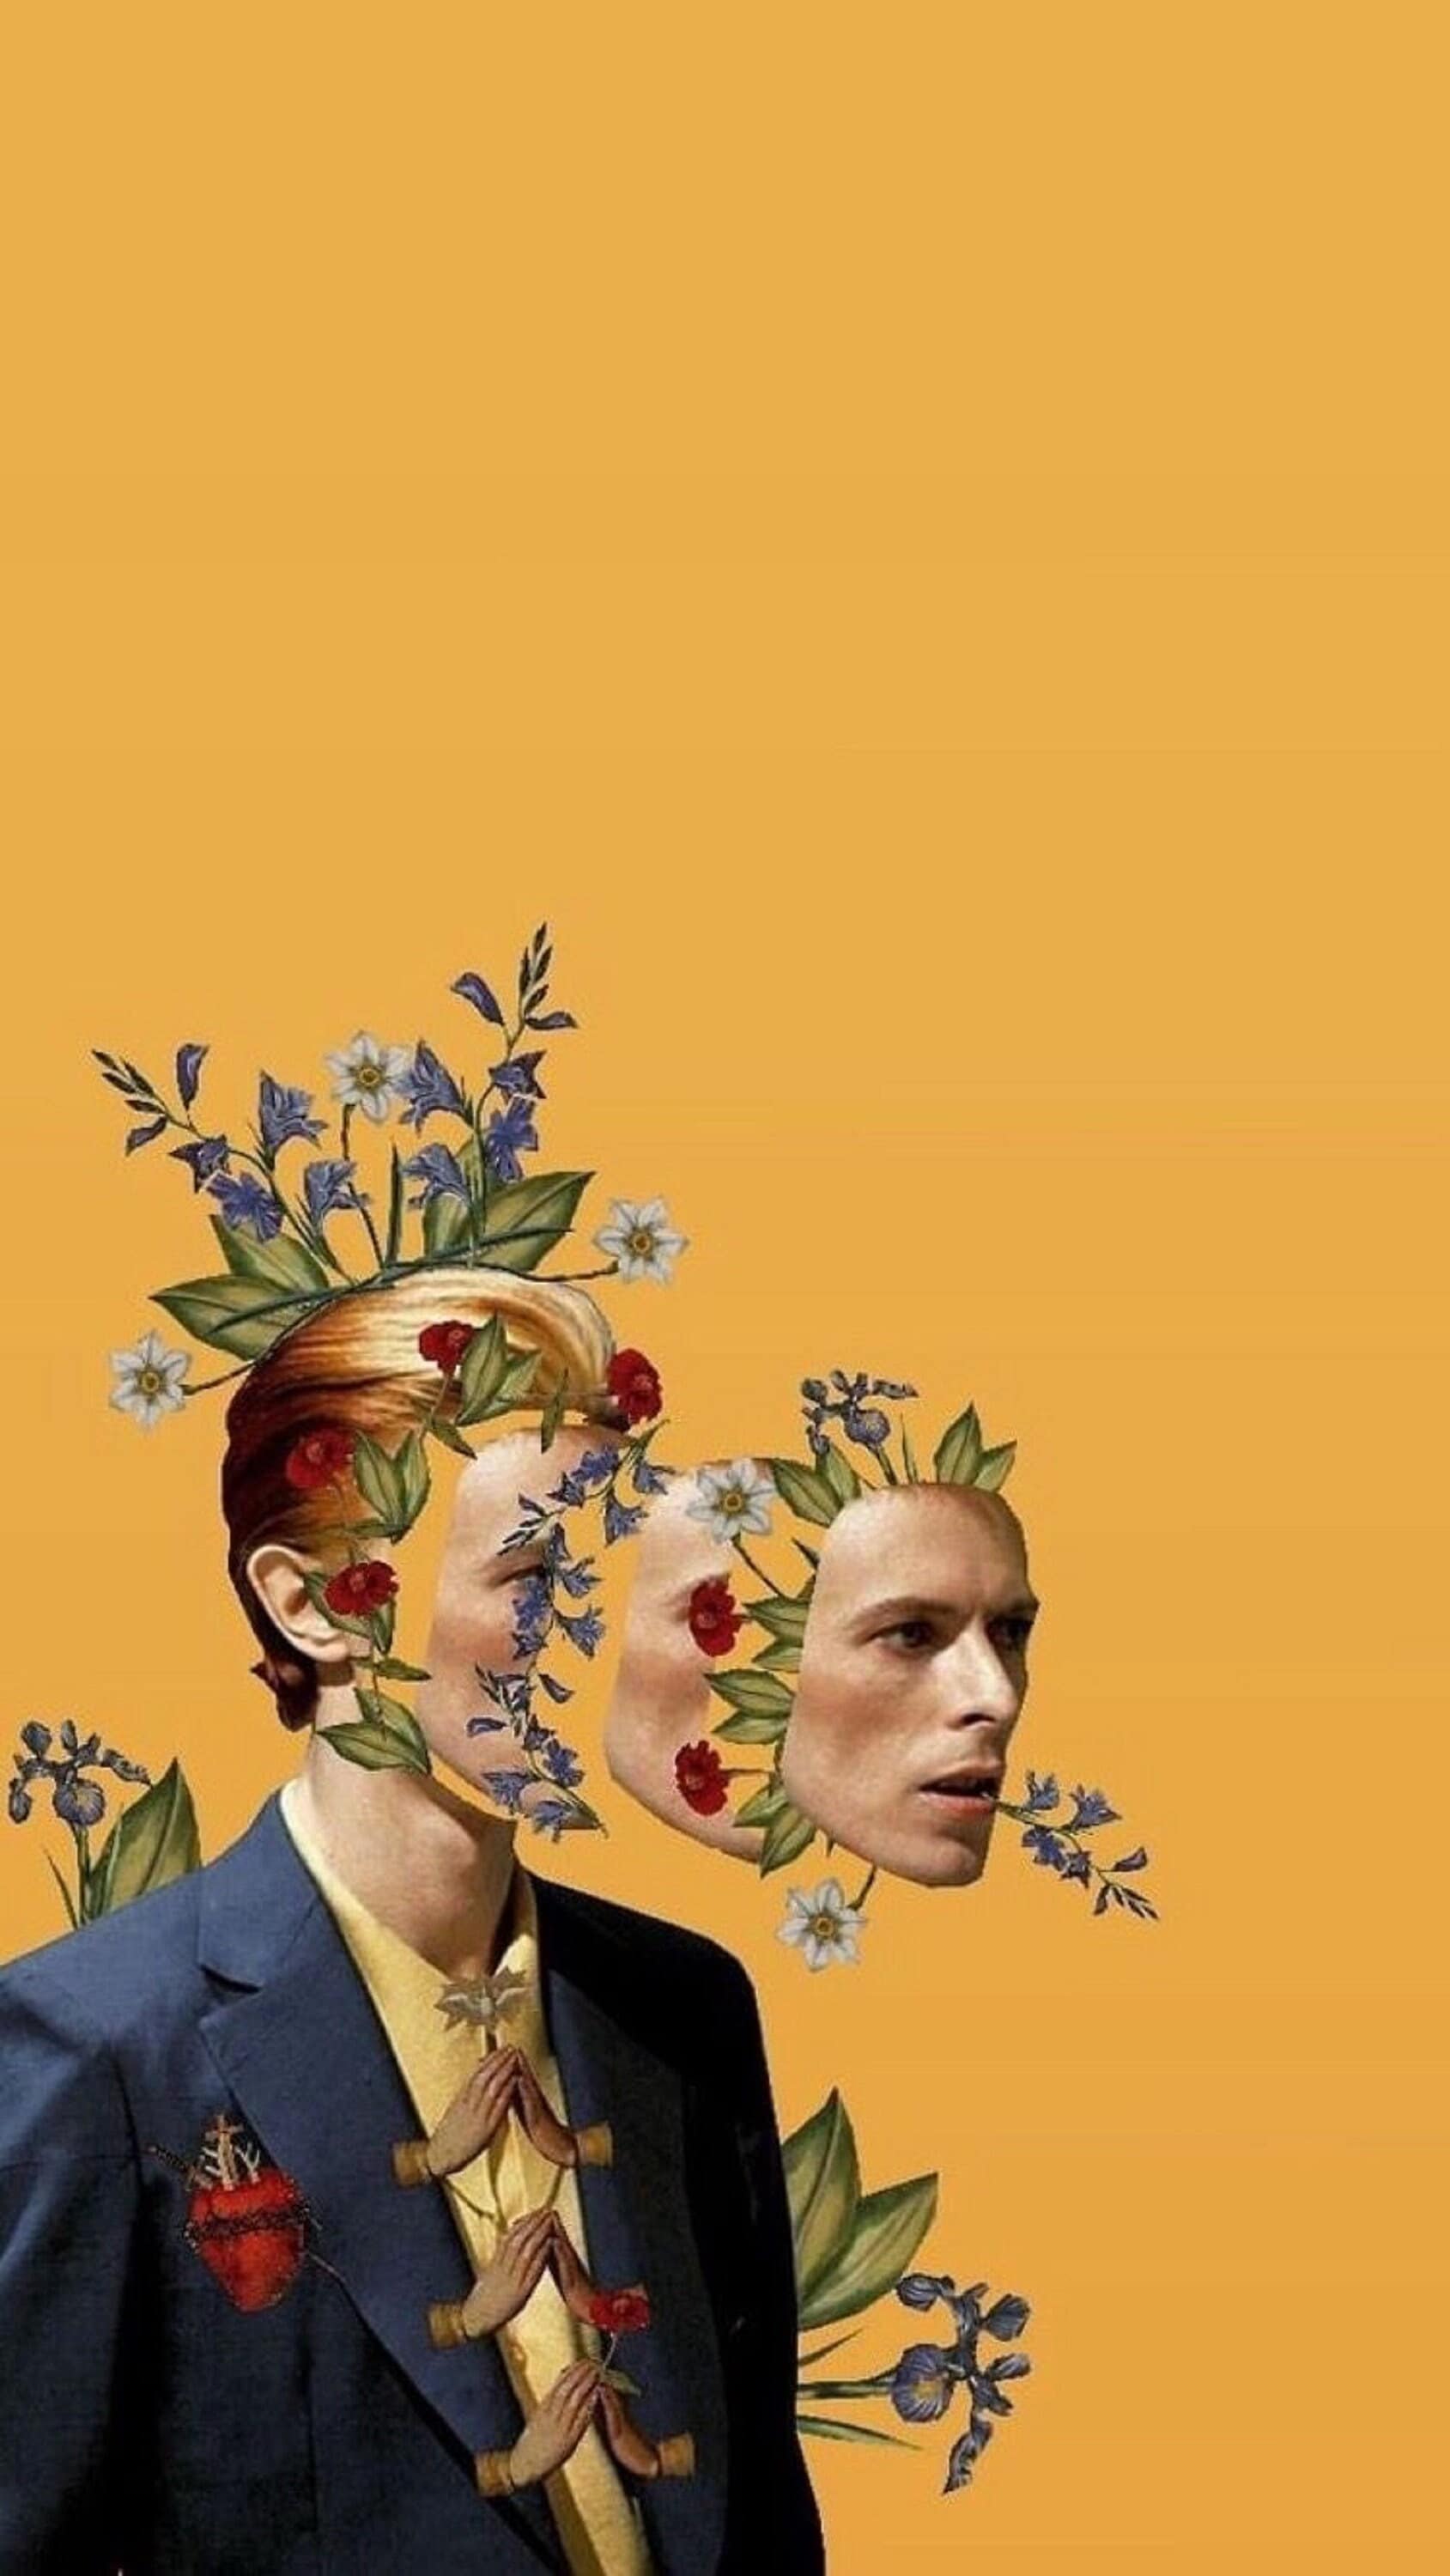 Collage of a man with flowers in his hair and a man's face on his shoulder. - David Bowie